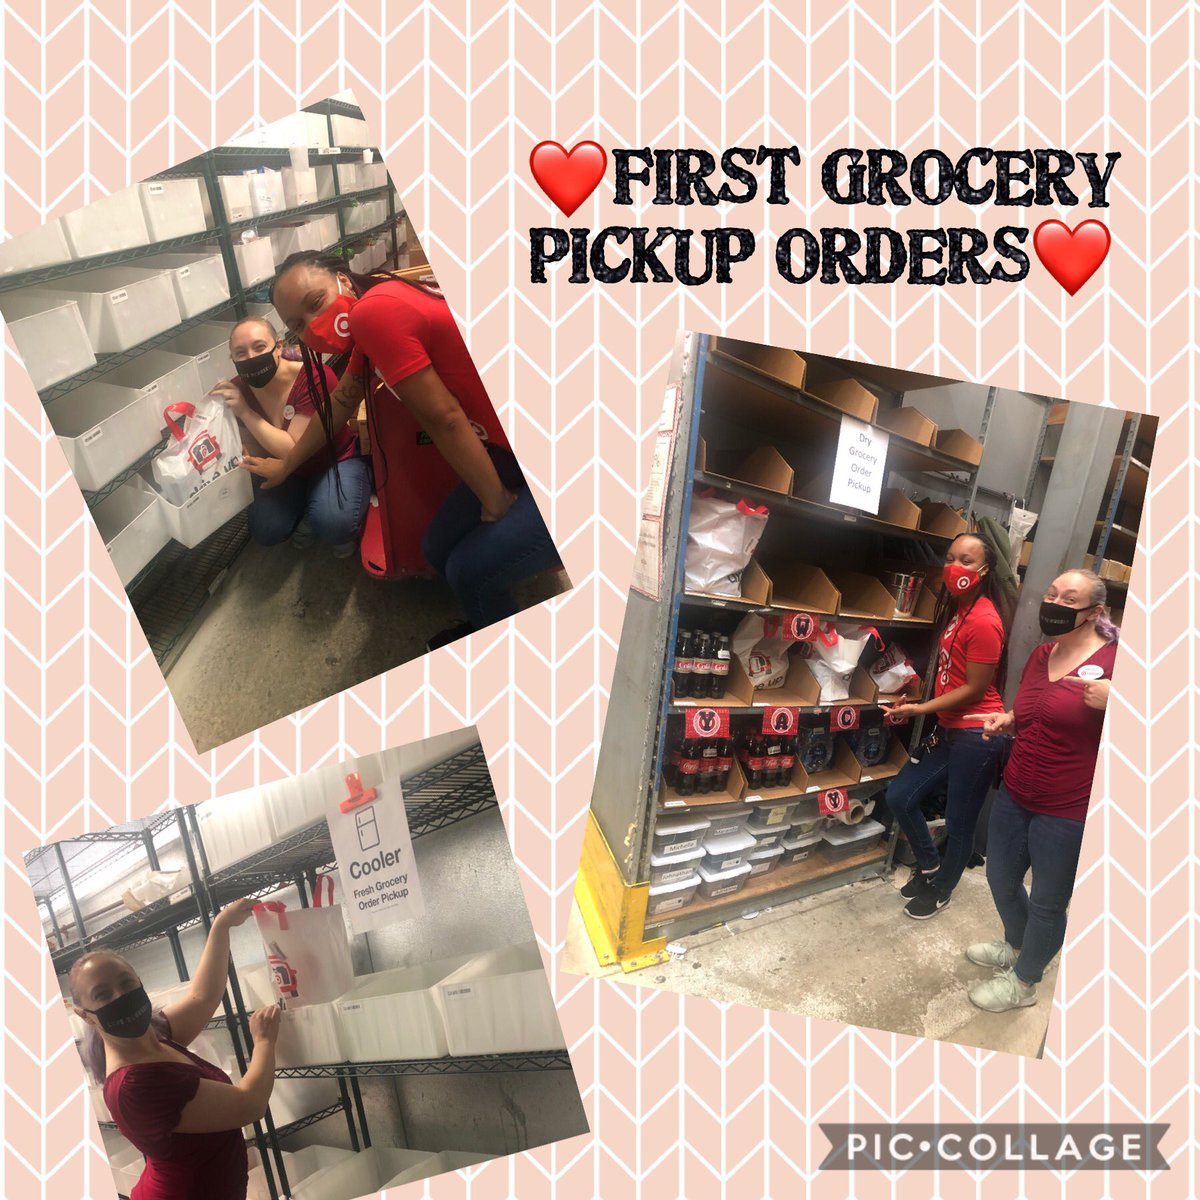 Need Groceries? We got you covered here at T1072! Our team is ready to slay this new Grocery Pickup Rollout and this lady can’t wait to see how much our guests love these amazing options! #AskAndYouShallReceive #AlwaysProgressing #Modernized